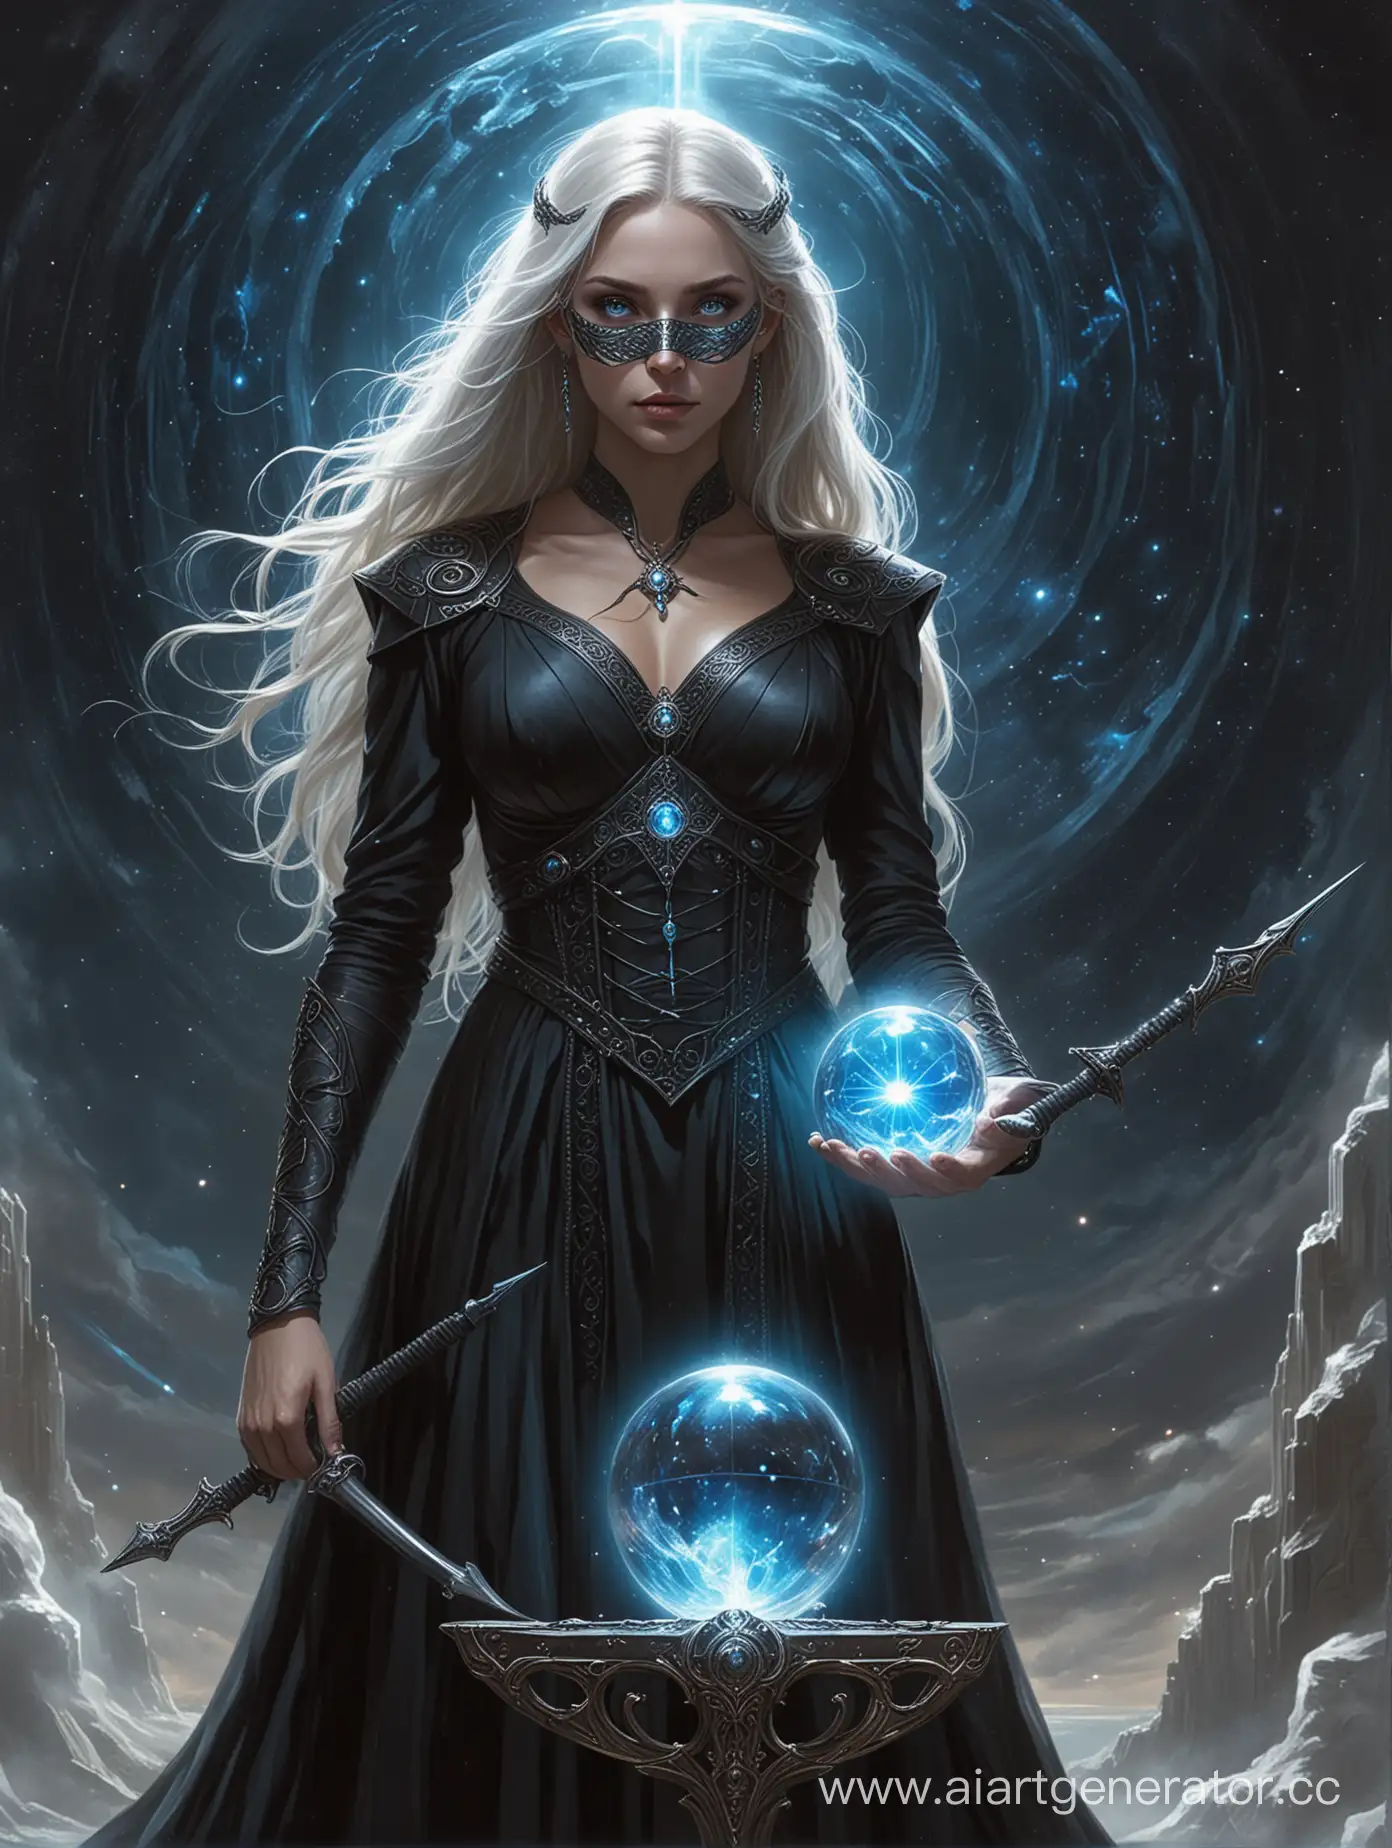 Oracle-Woman-with-Crystal-Ball-and-Iron-Sword-in-Space